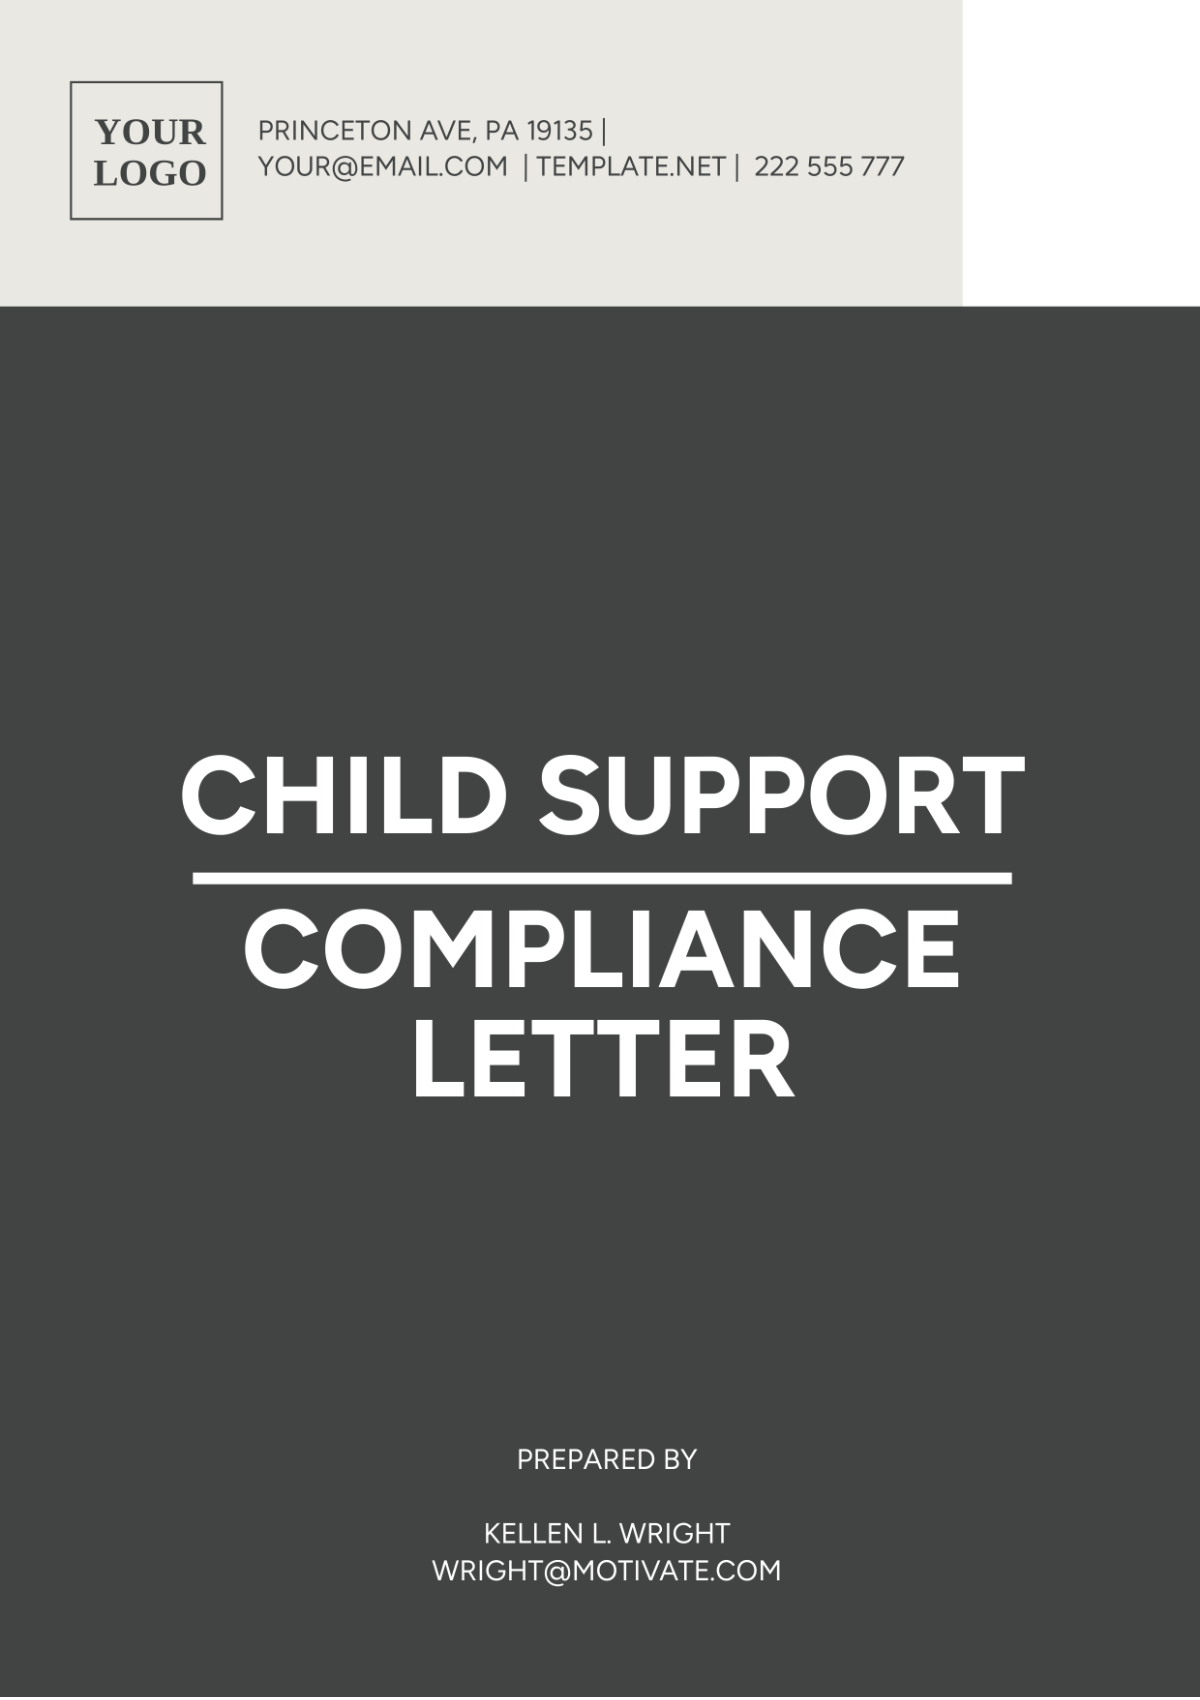 Child Support Compliance Letter Template